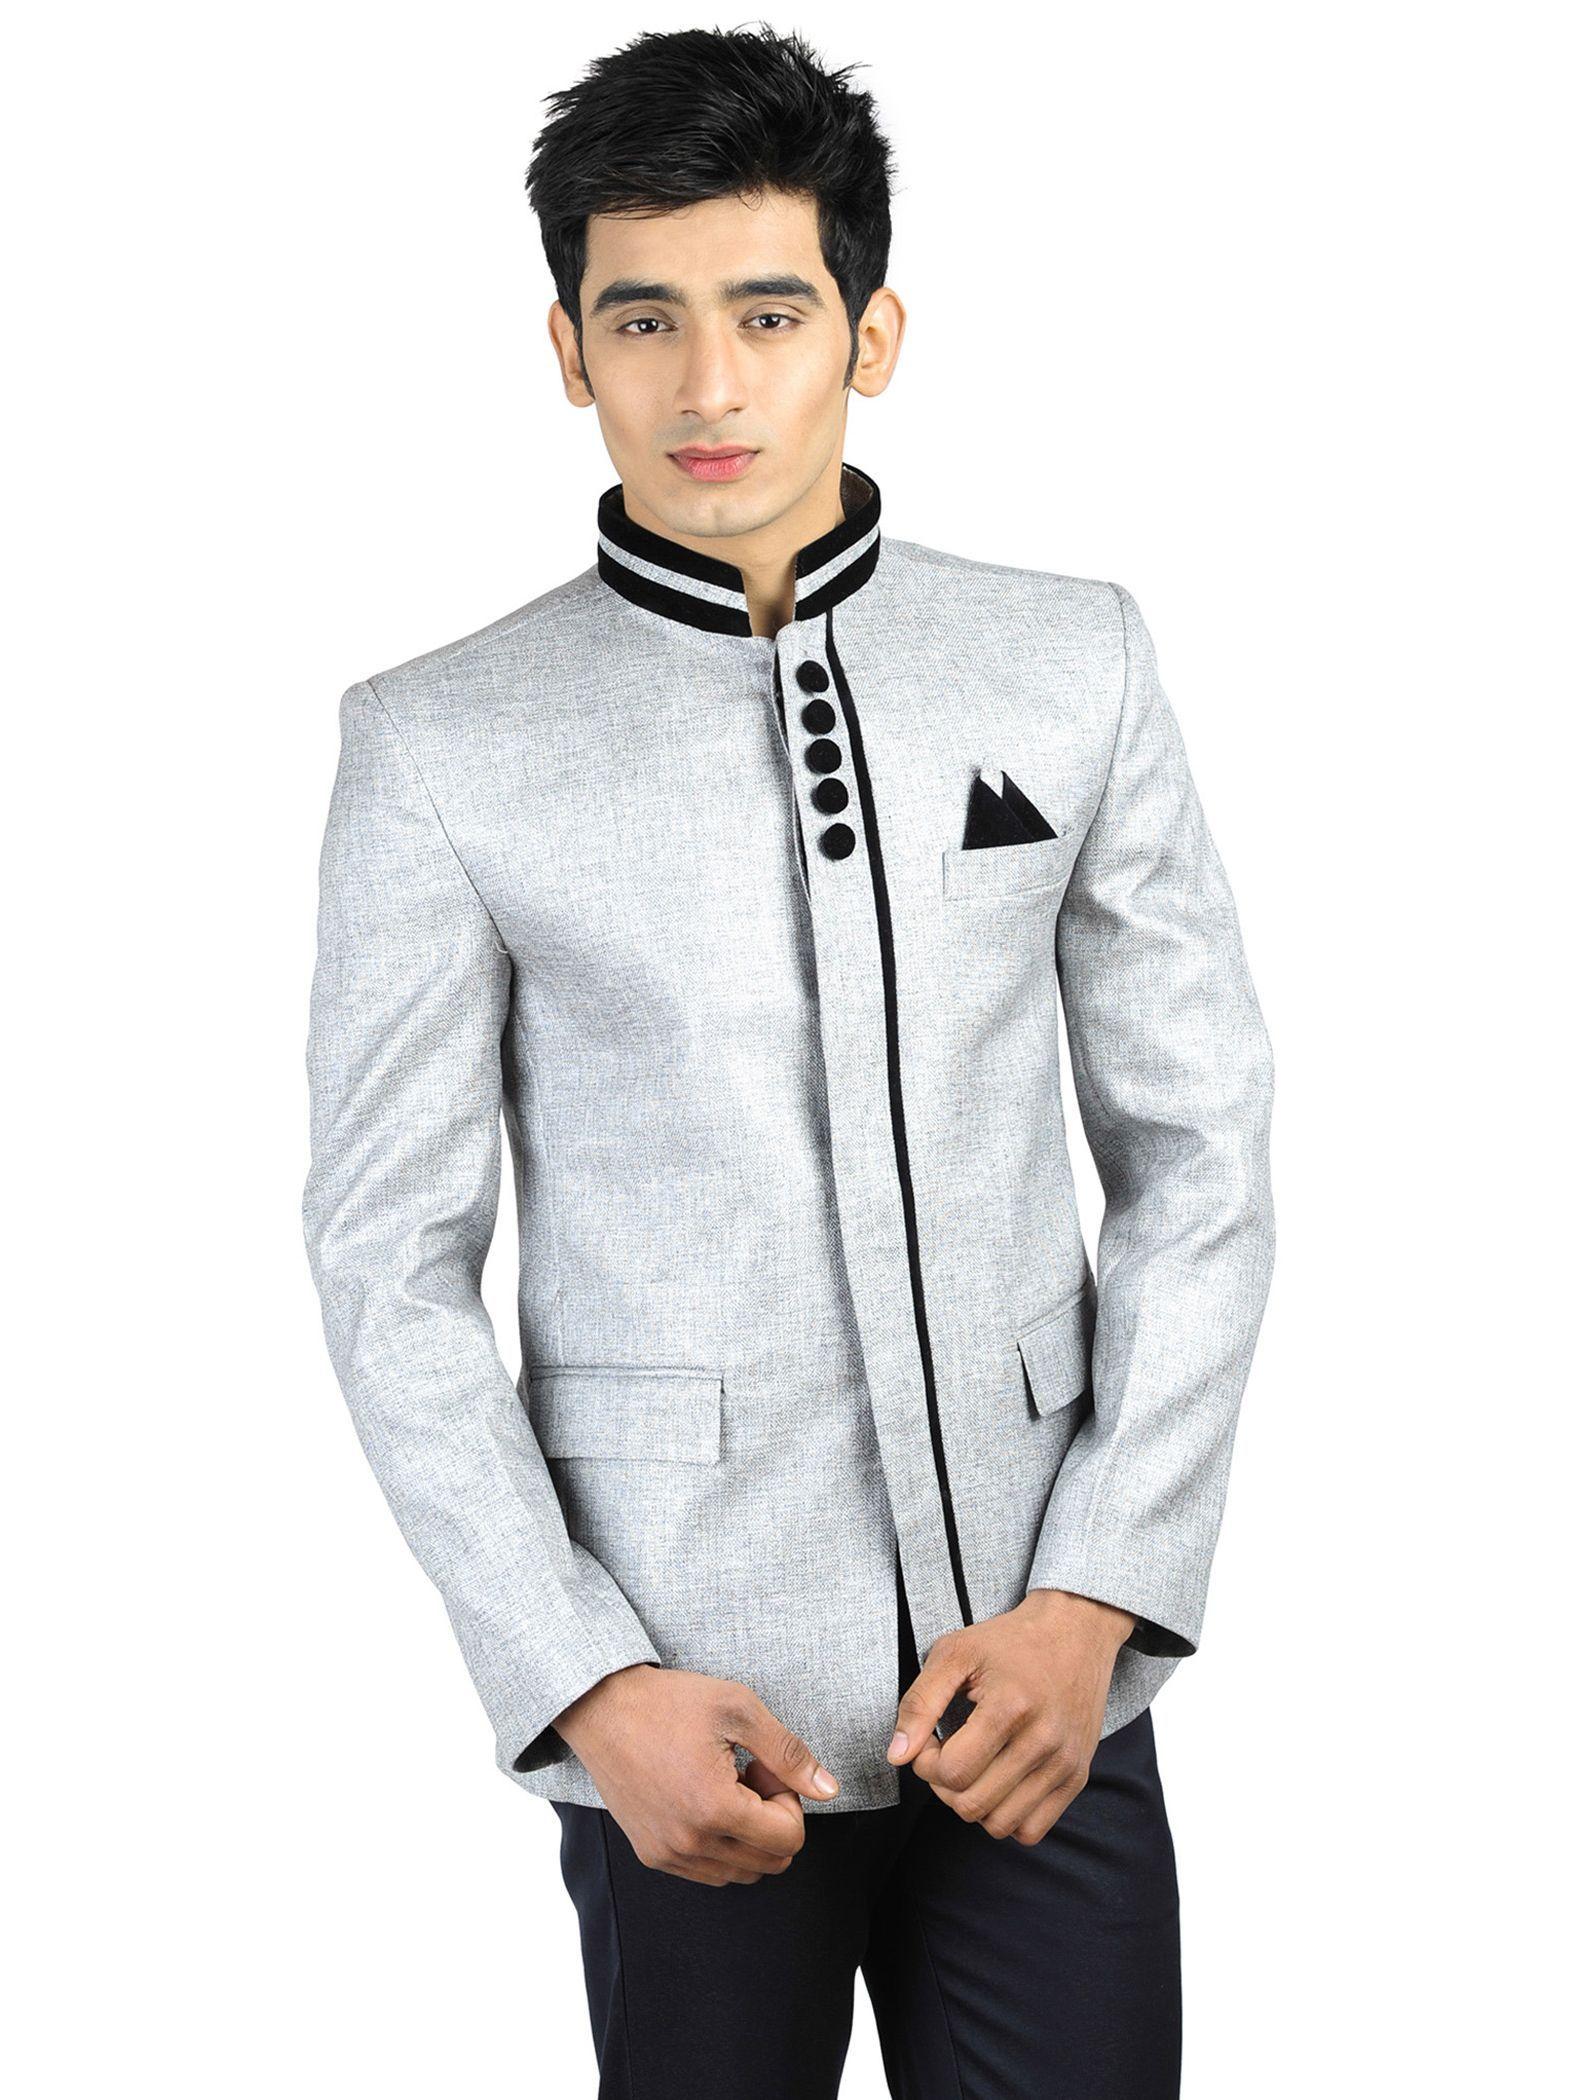 wintage-men-silver-single-breasted-tailored-fit-ethnic-bandhgala-blazer